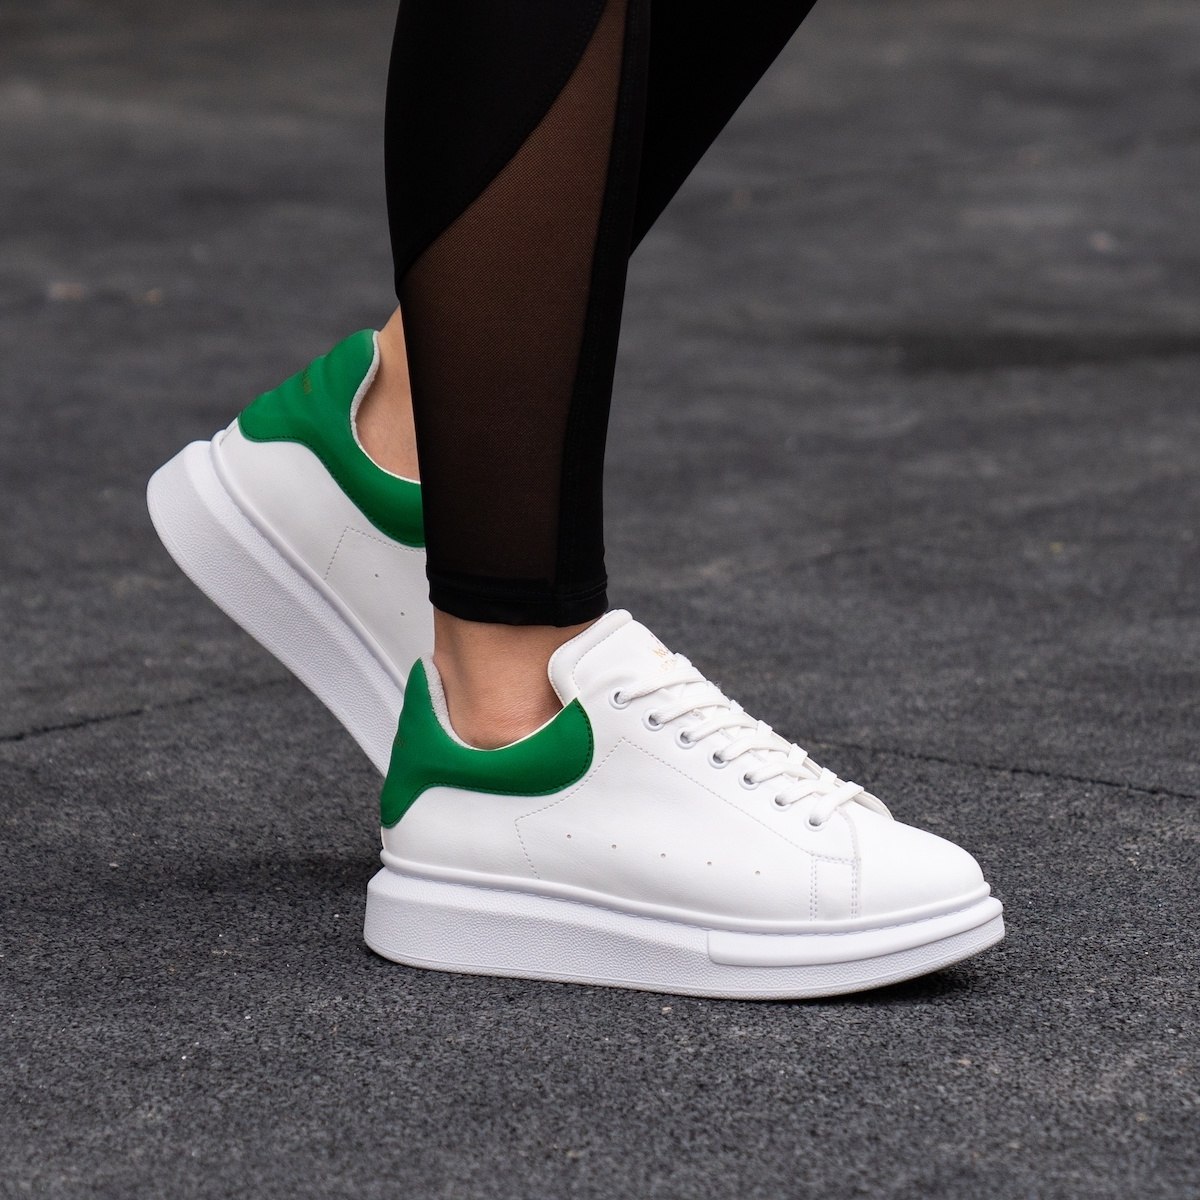 Martin Valen Women’s Chunky Sneakers in White and Green | Martin Valen